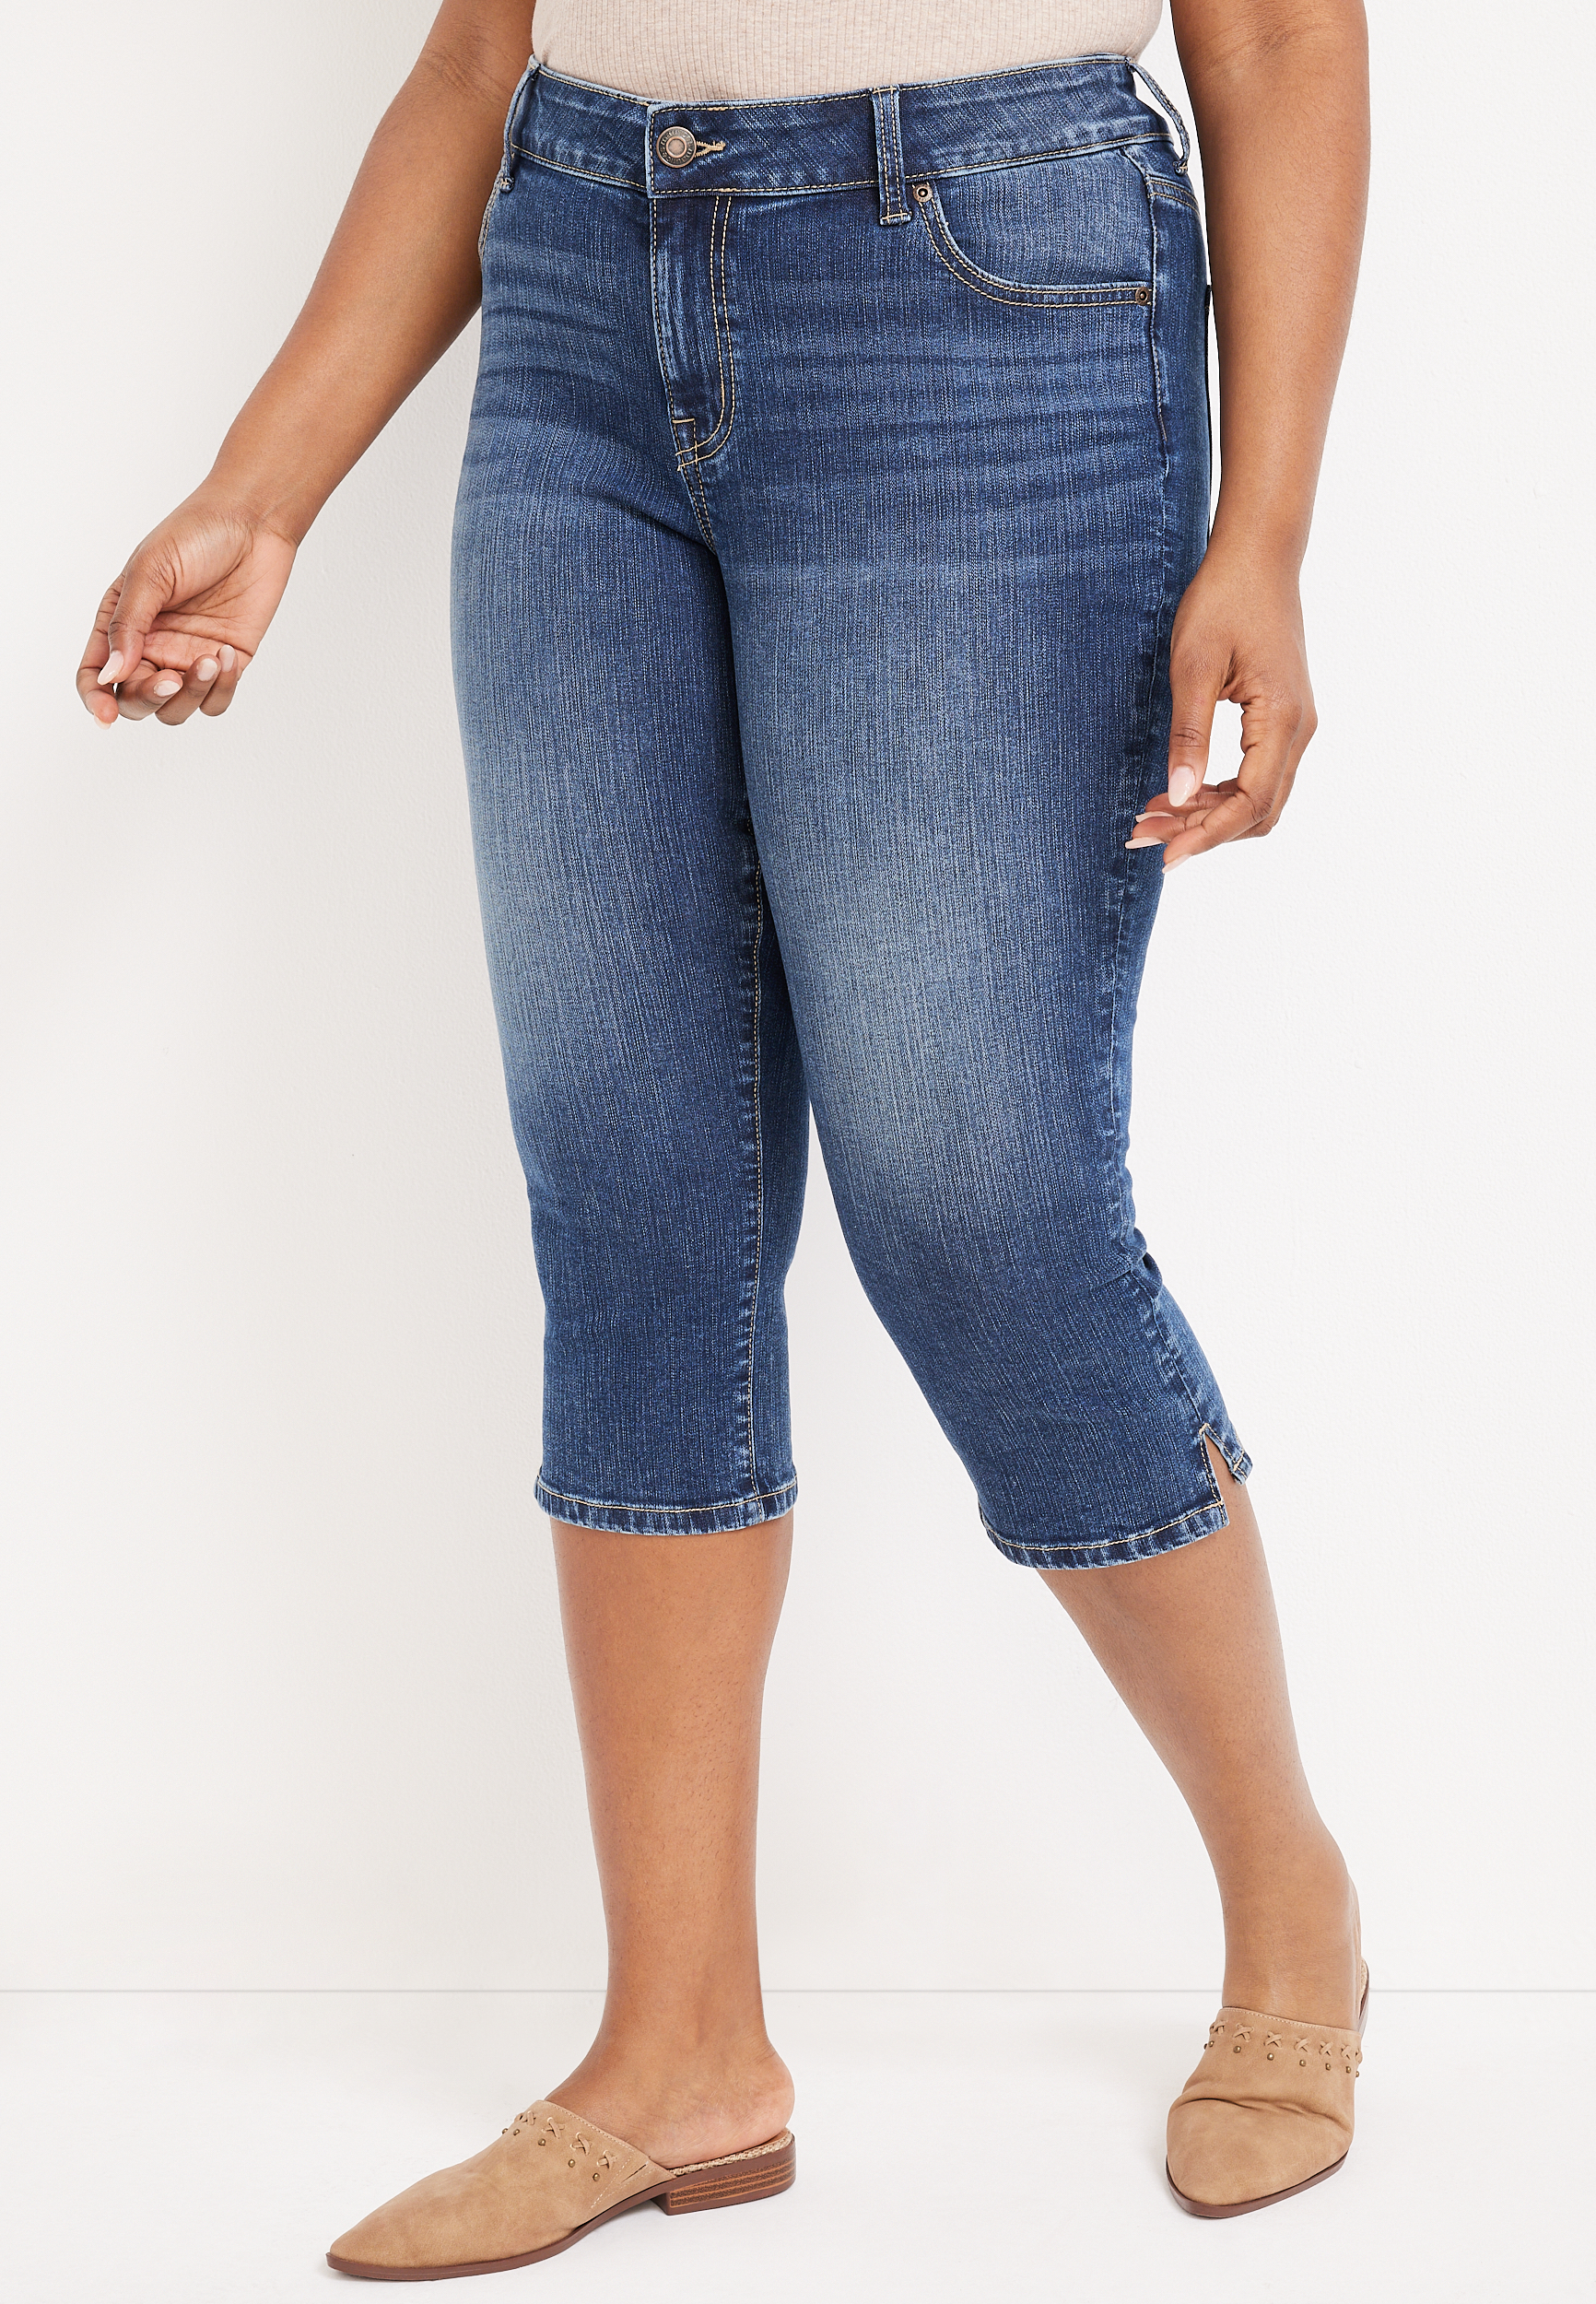 Plus Size m jeans by maurices™ Classic Mid Rise Capri